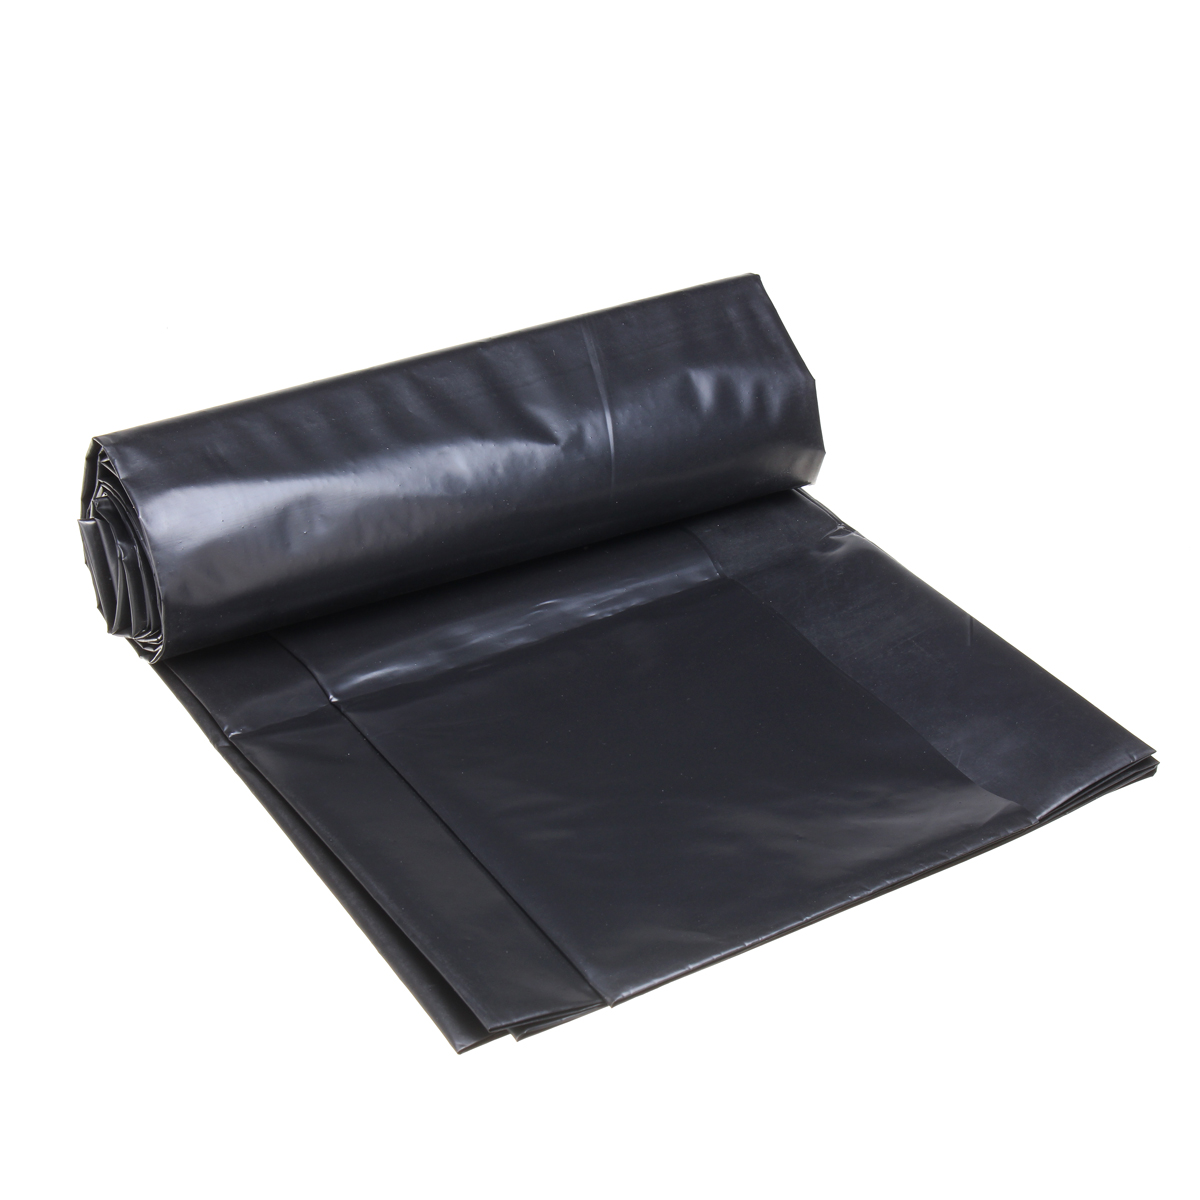 3 Size Fish Pond Liner Cloth Home Garden Pool Reinforced HDPE Heavy Duty Landscaping Garden Pool Waterproof Liner Fabric Black